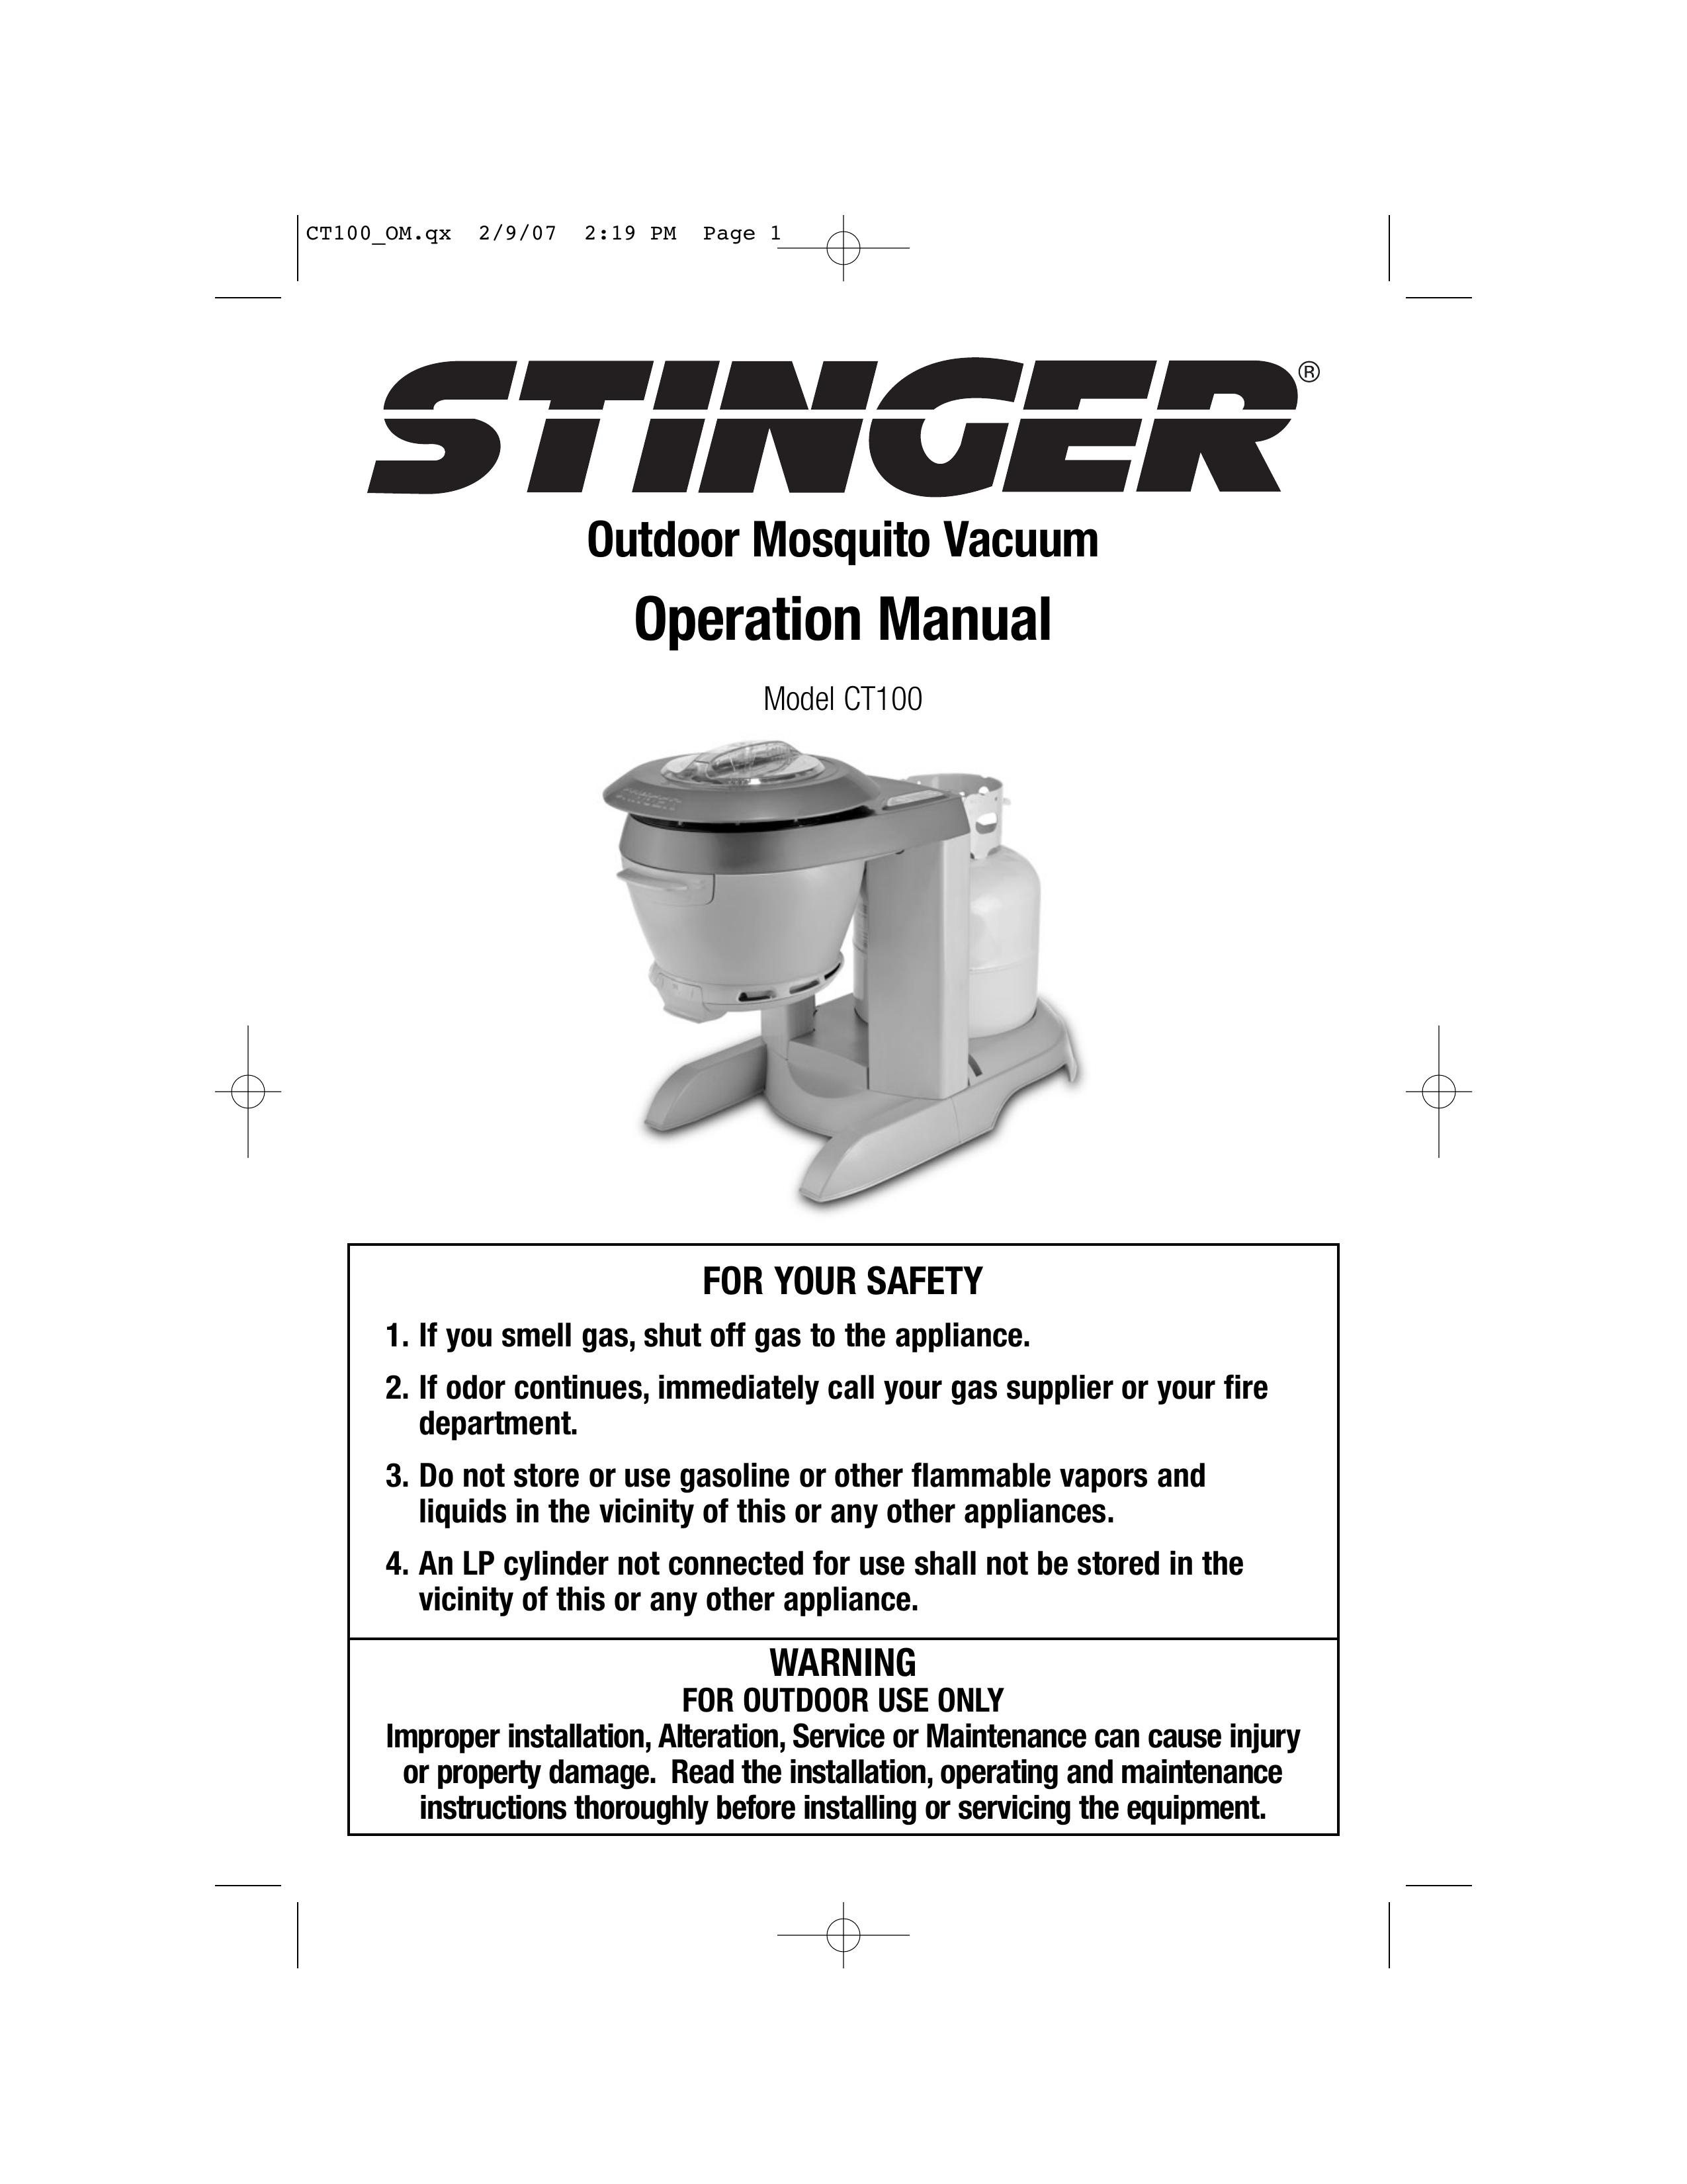 Stinger CT100 Insect Control Equipment User Manual